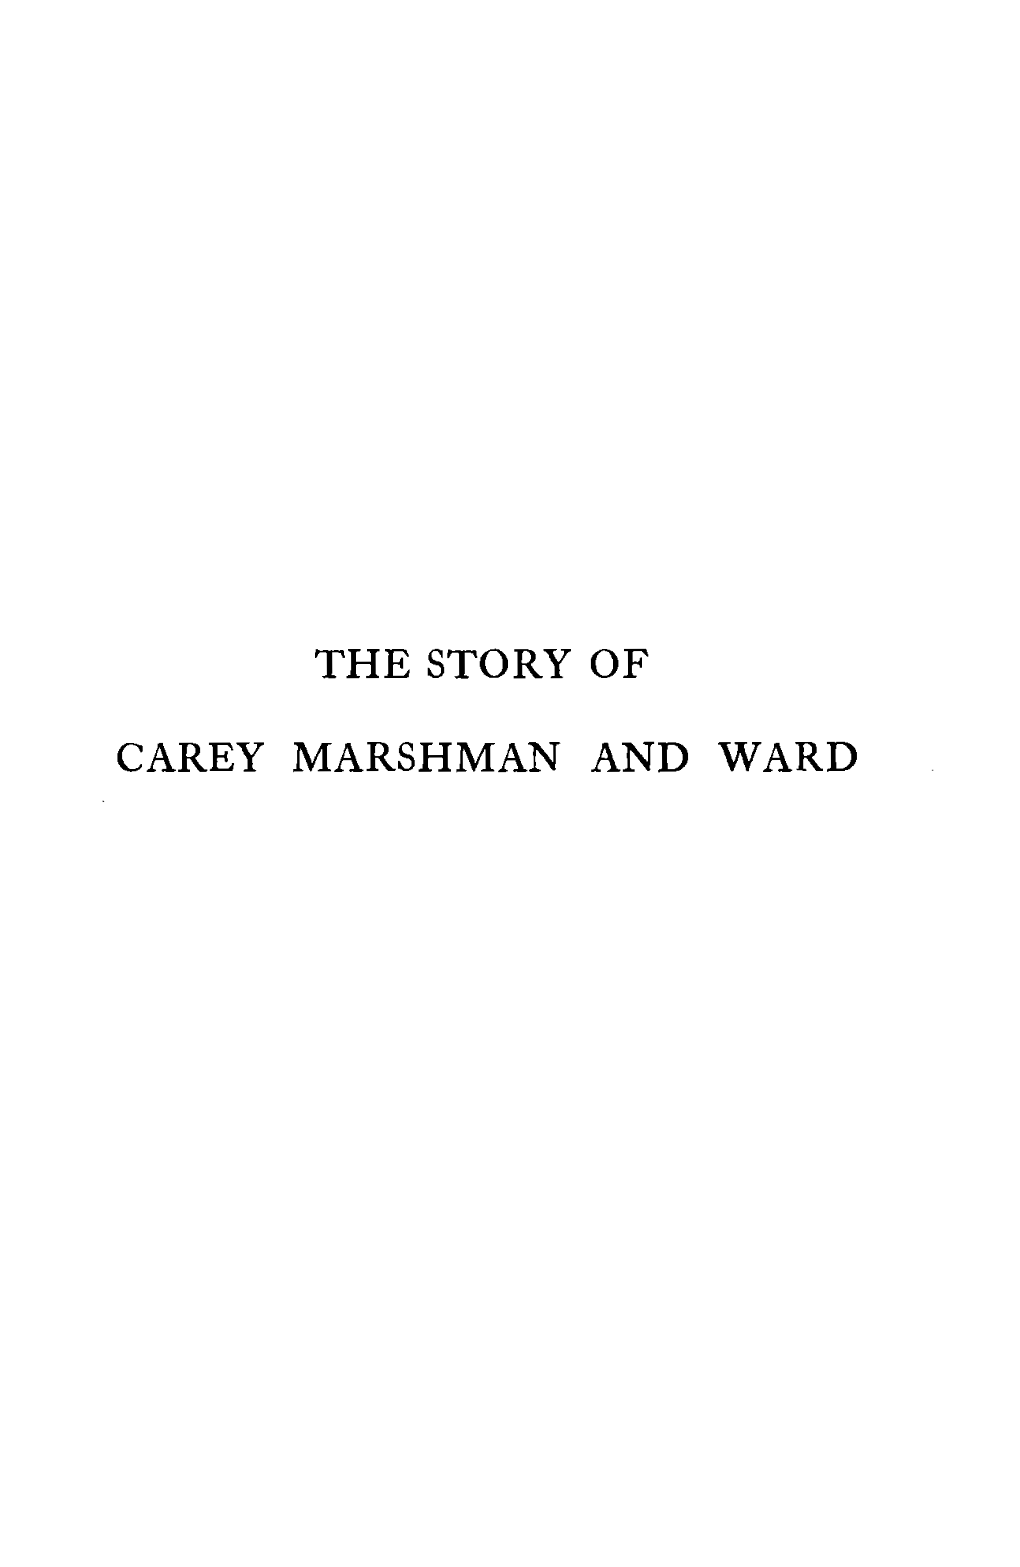 The Story of Carey Marshman and Ward